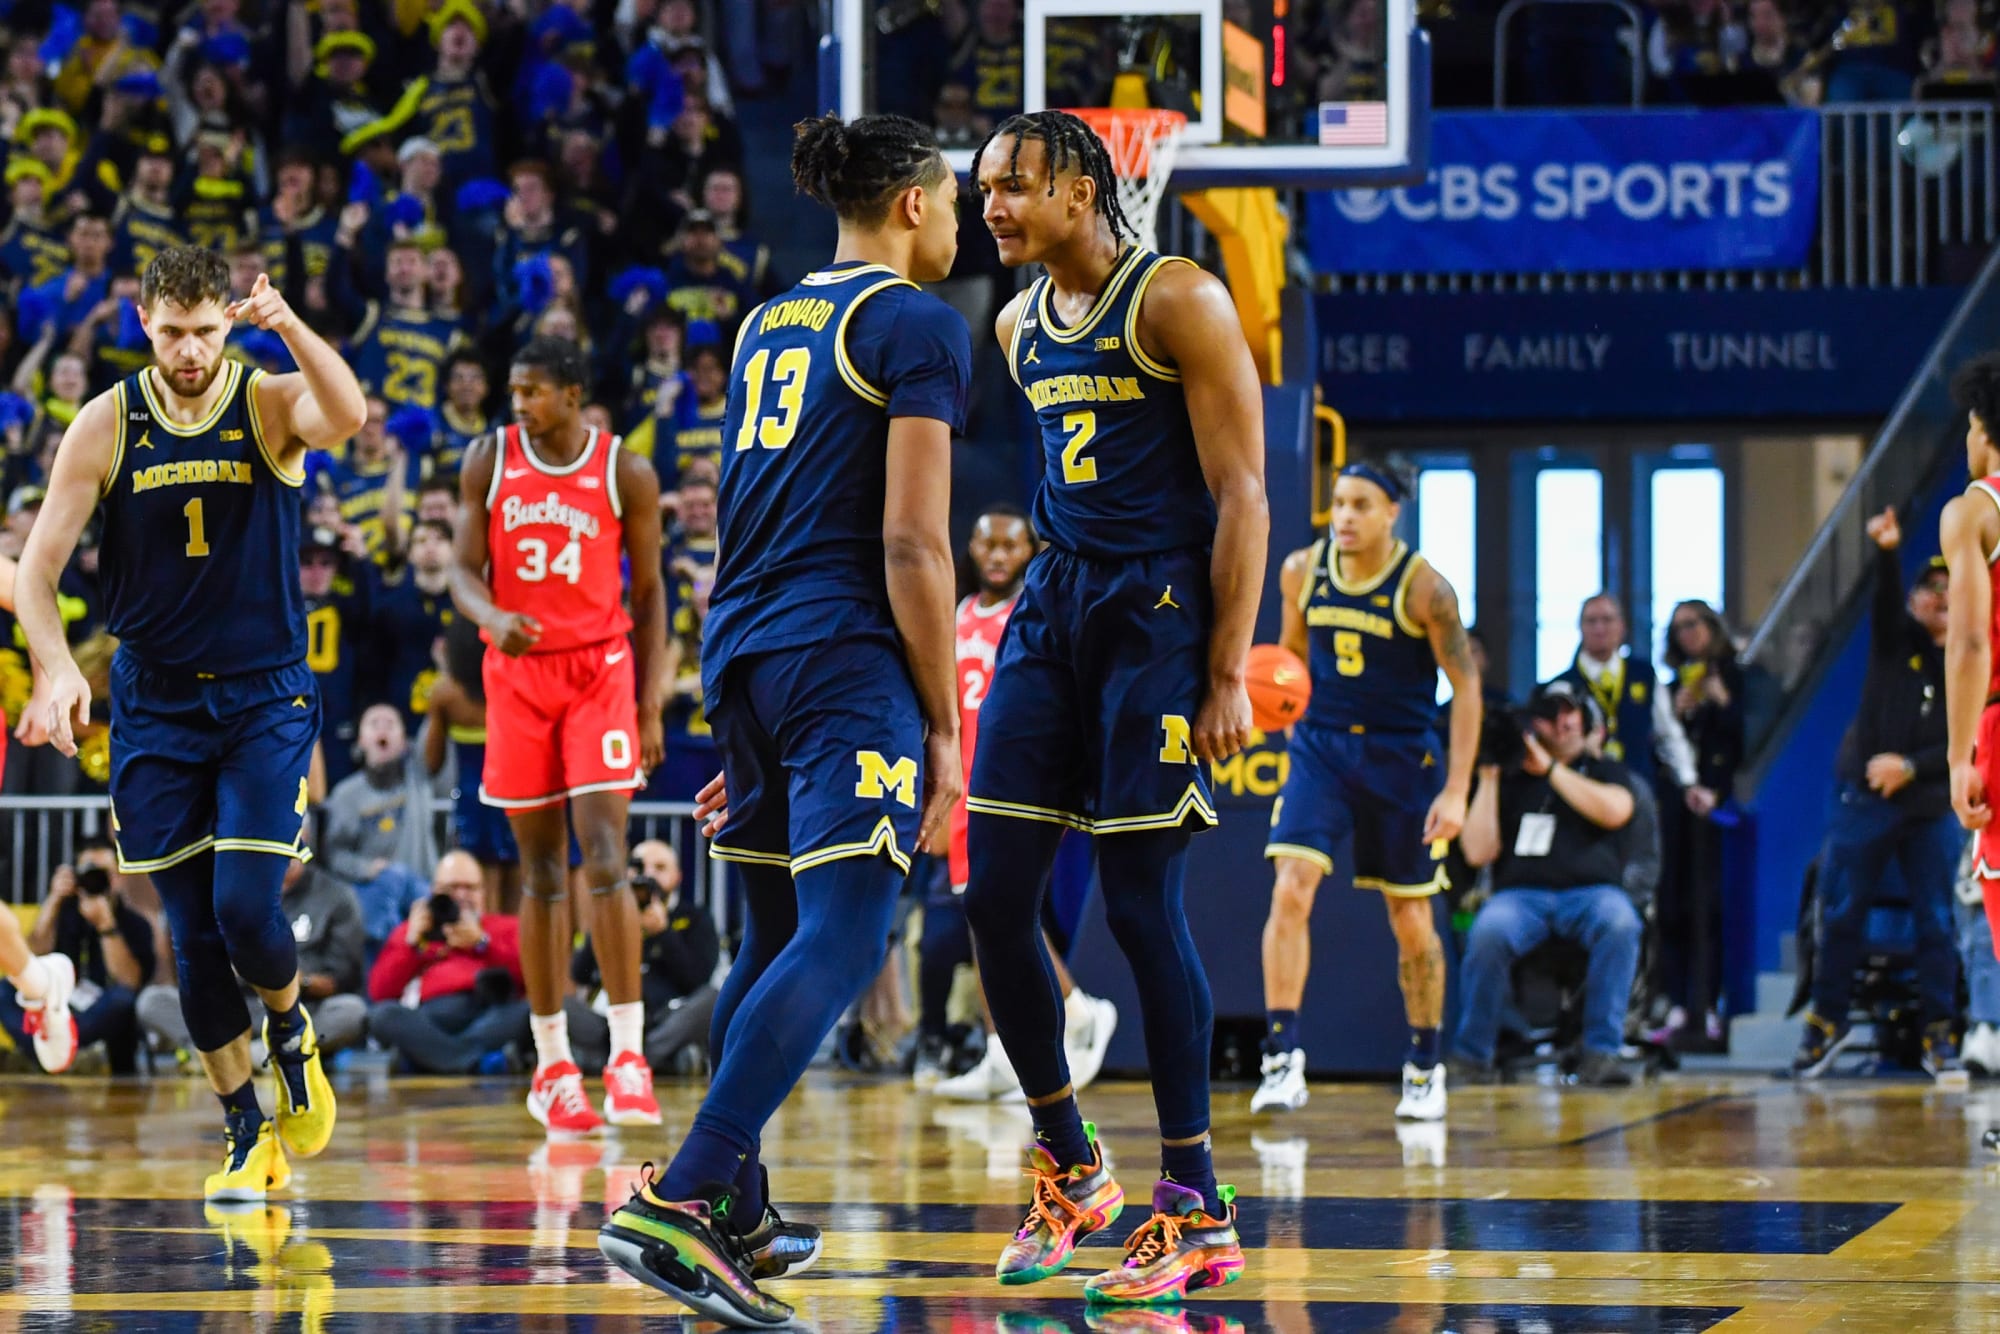 Michigan Basketball: Can the Wolverines Make the Tournament?